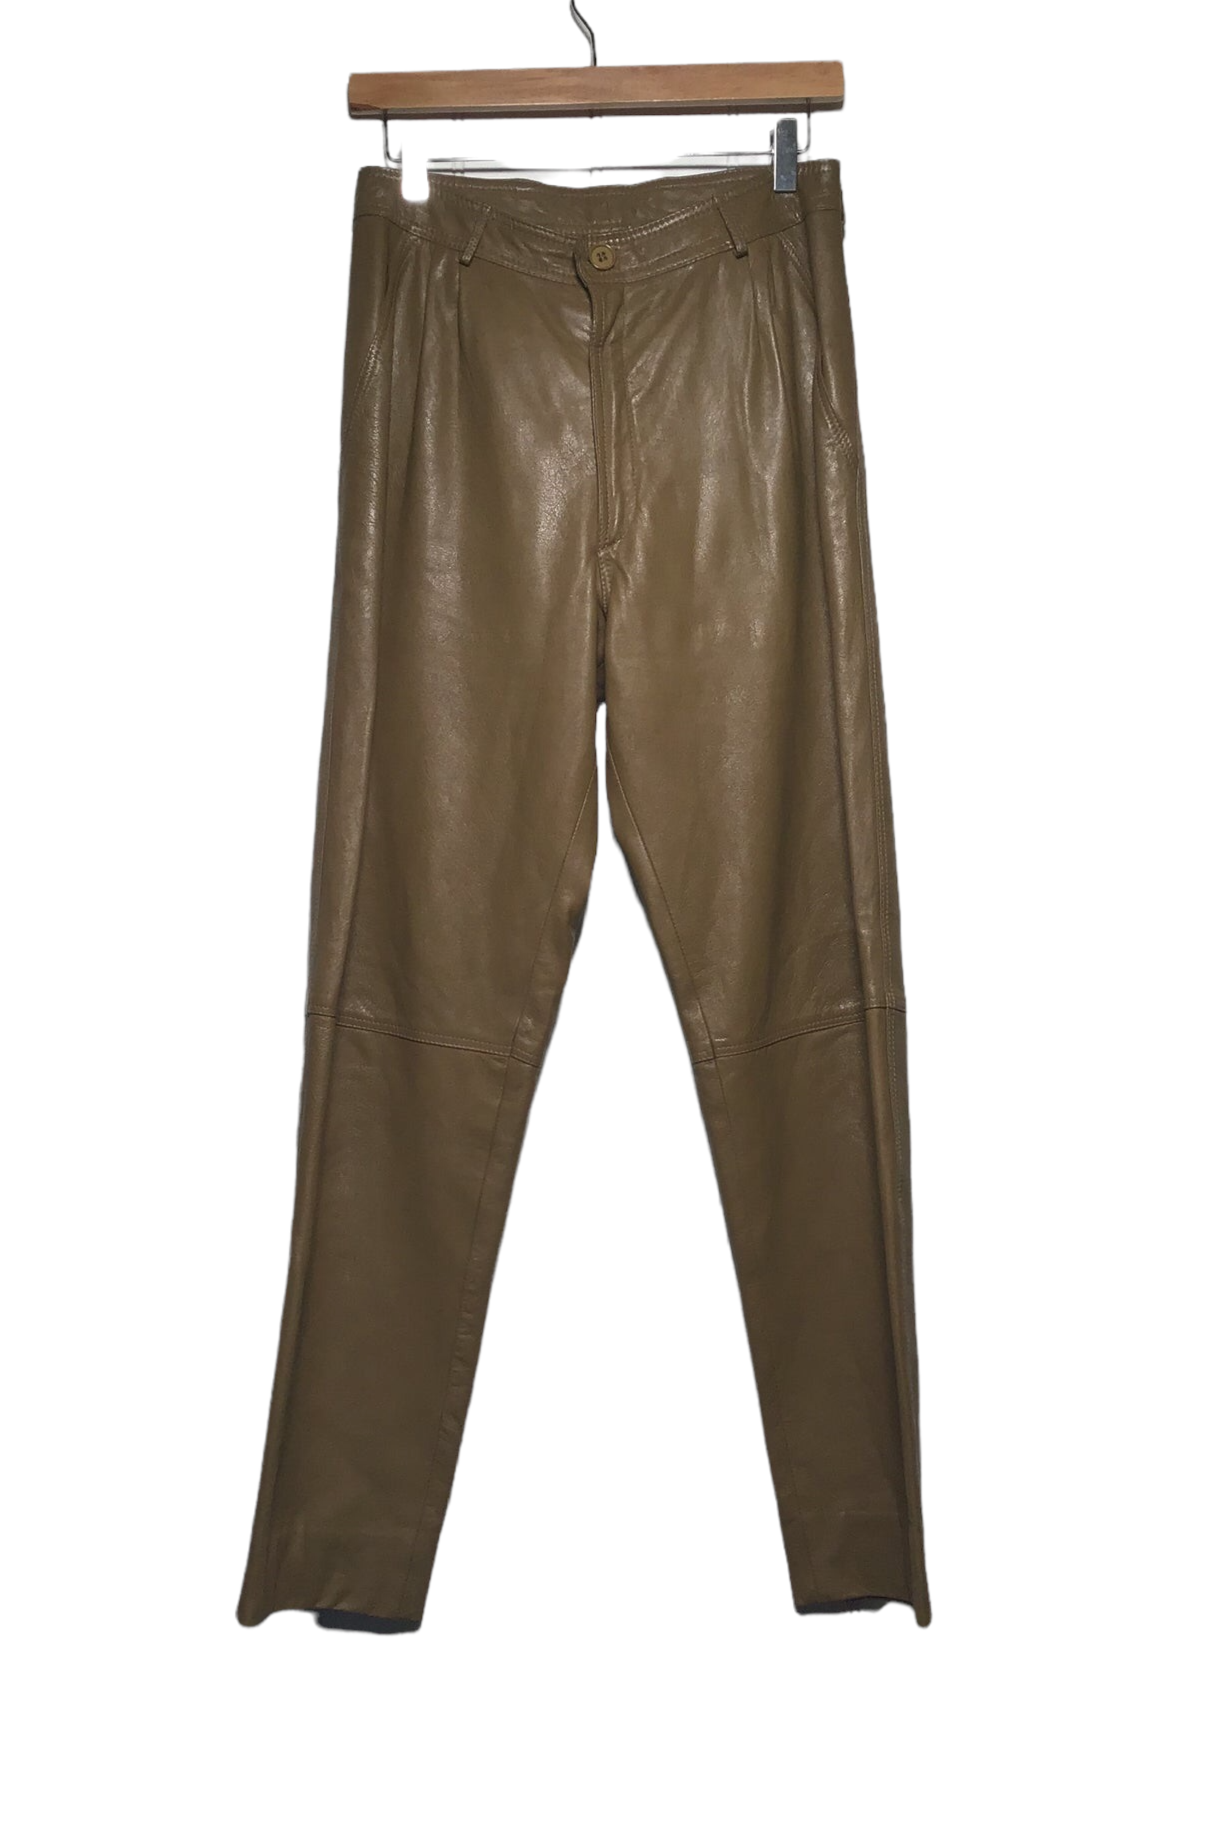 Leather Trousers (Size M)